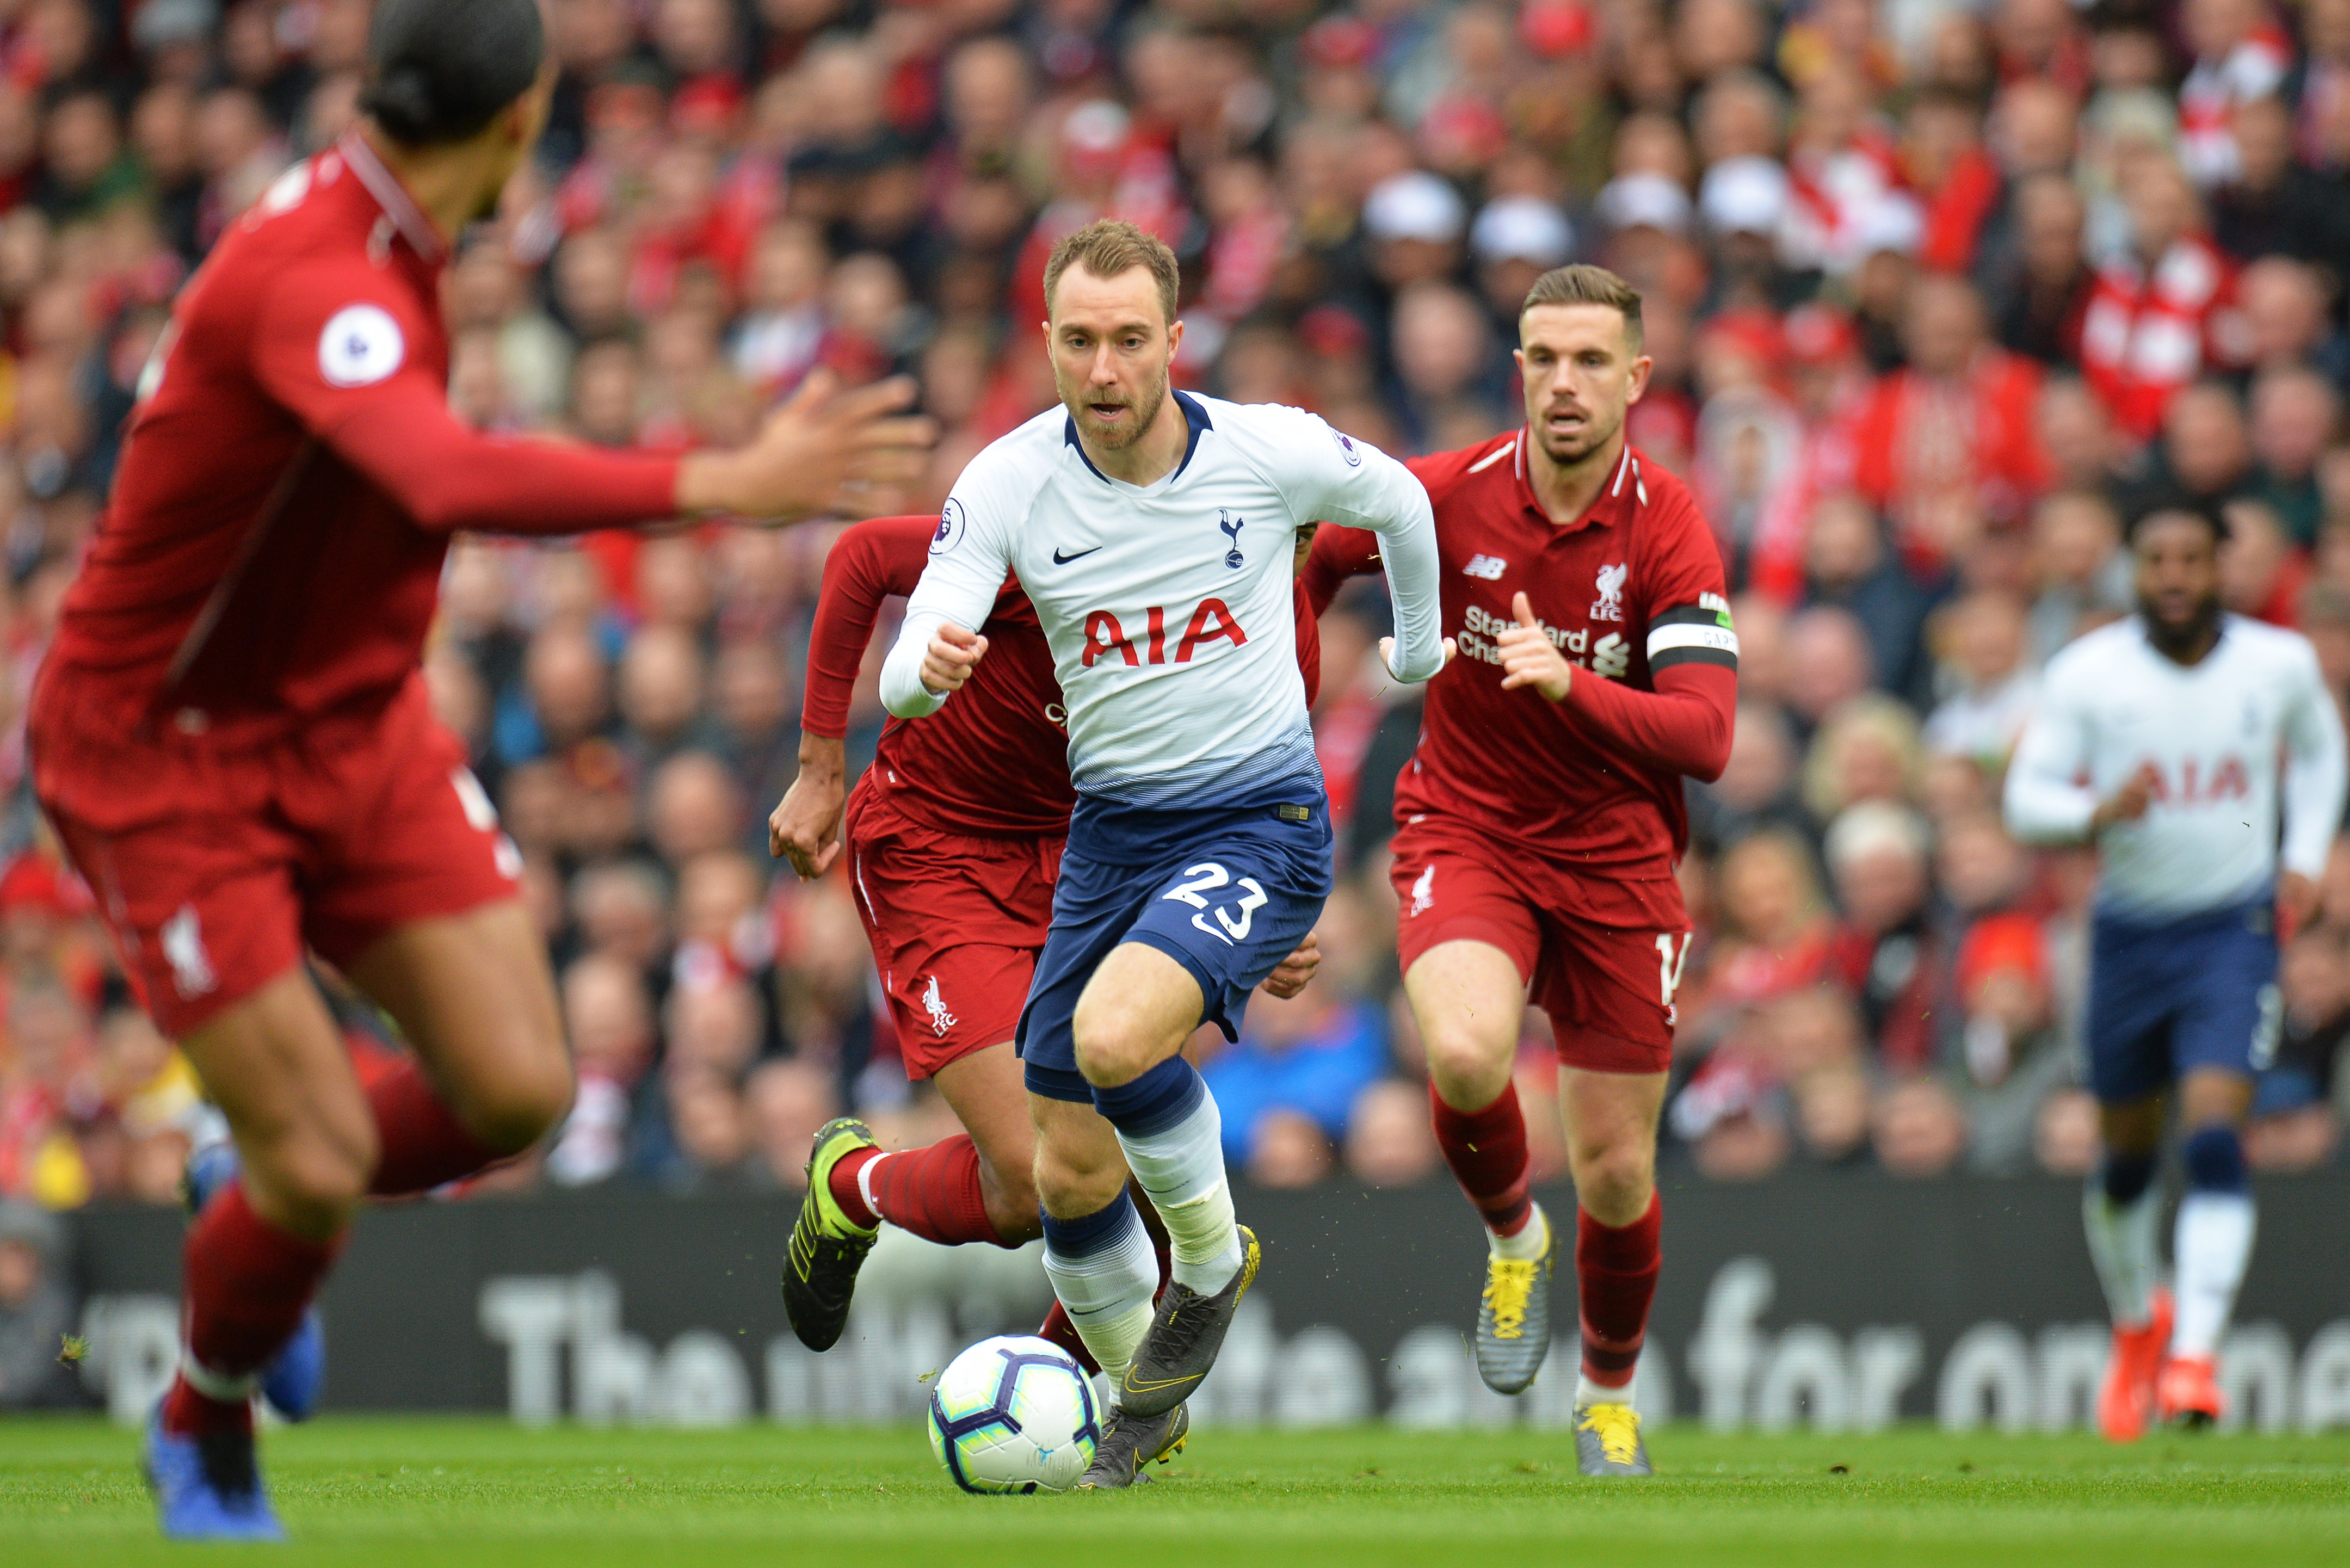 epa07476701 Liverpool's captain Jordan Henderson (R) in action against Tottenham's Christian Eriksen (L) during the English Premier League soccer match between Liverpool FC and Tottenham Hotspur at Anfield in Liverpool, Britain, 31 March 2019.  EPA/PETER POWELL EDITORIAL USE ONLY. No use with unauthorized audio, video, data, fixture lists, club/league logos or 'live' services. Online in-match use limited to 120 images, no video emulation. No use in betting, games or single club/league/player publications